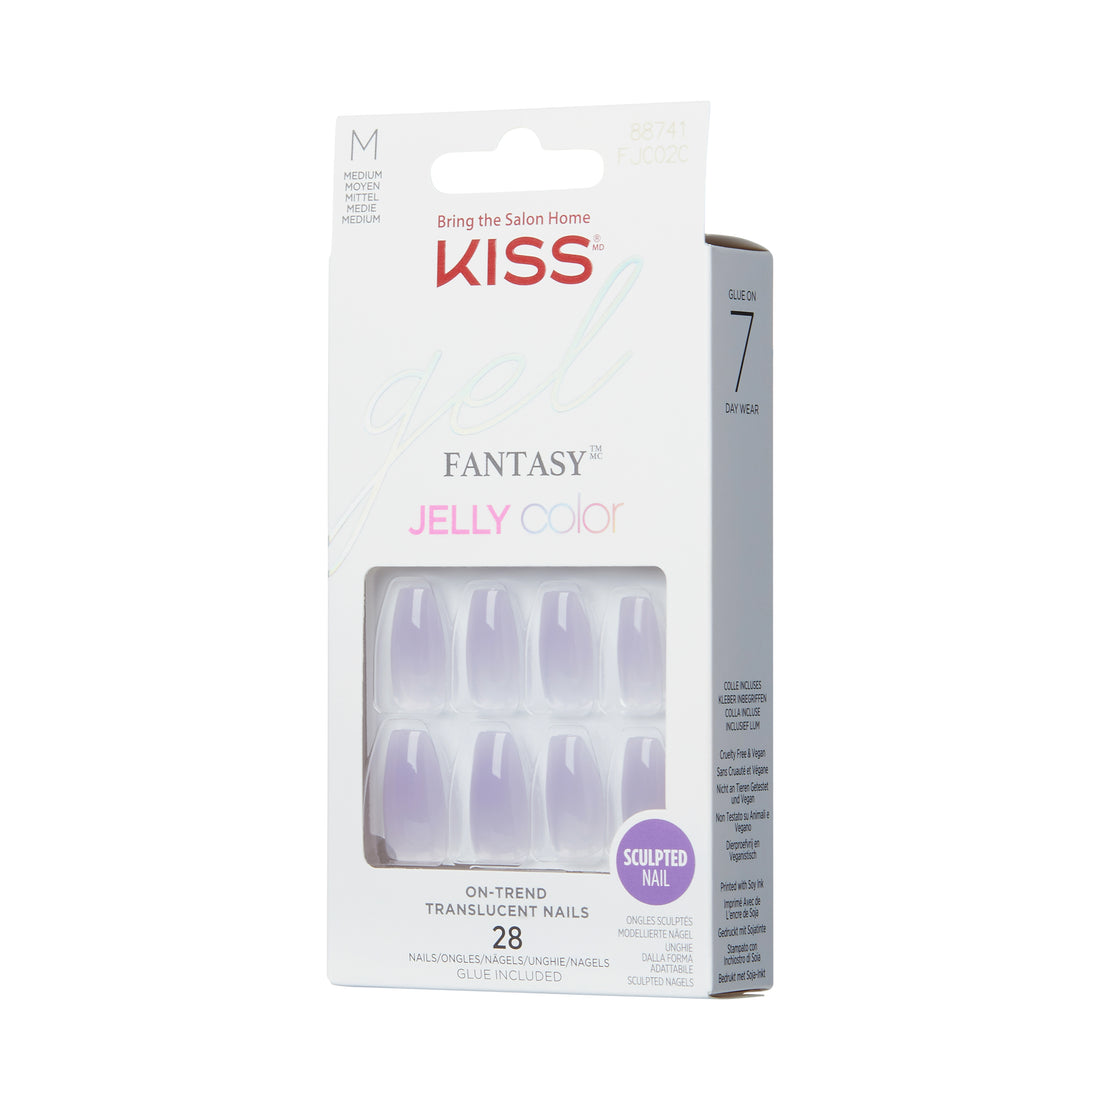 KISS Gel Fantasy Jelly Color Nails - Quince Jelly